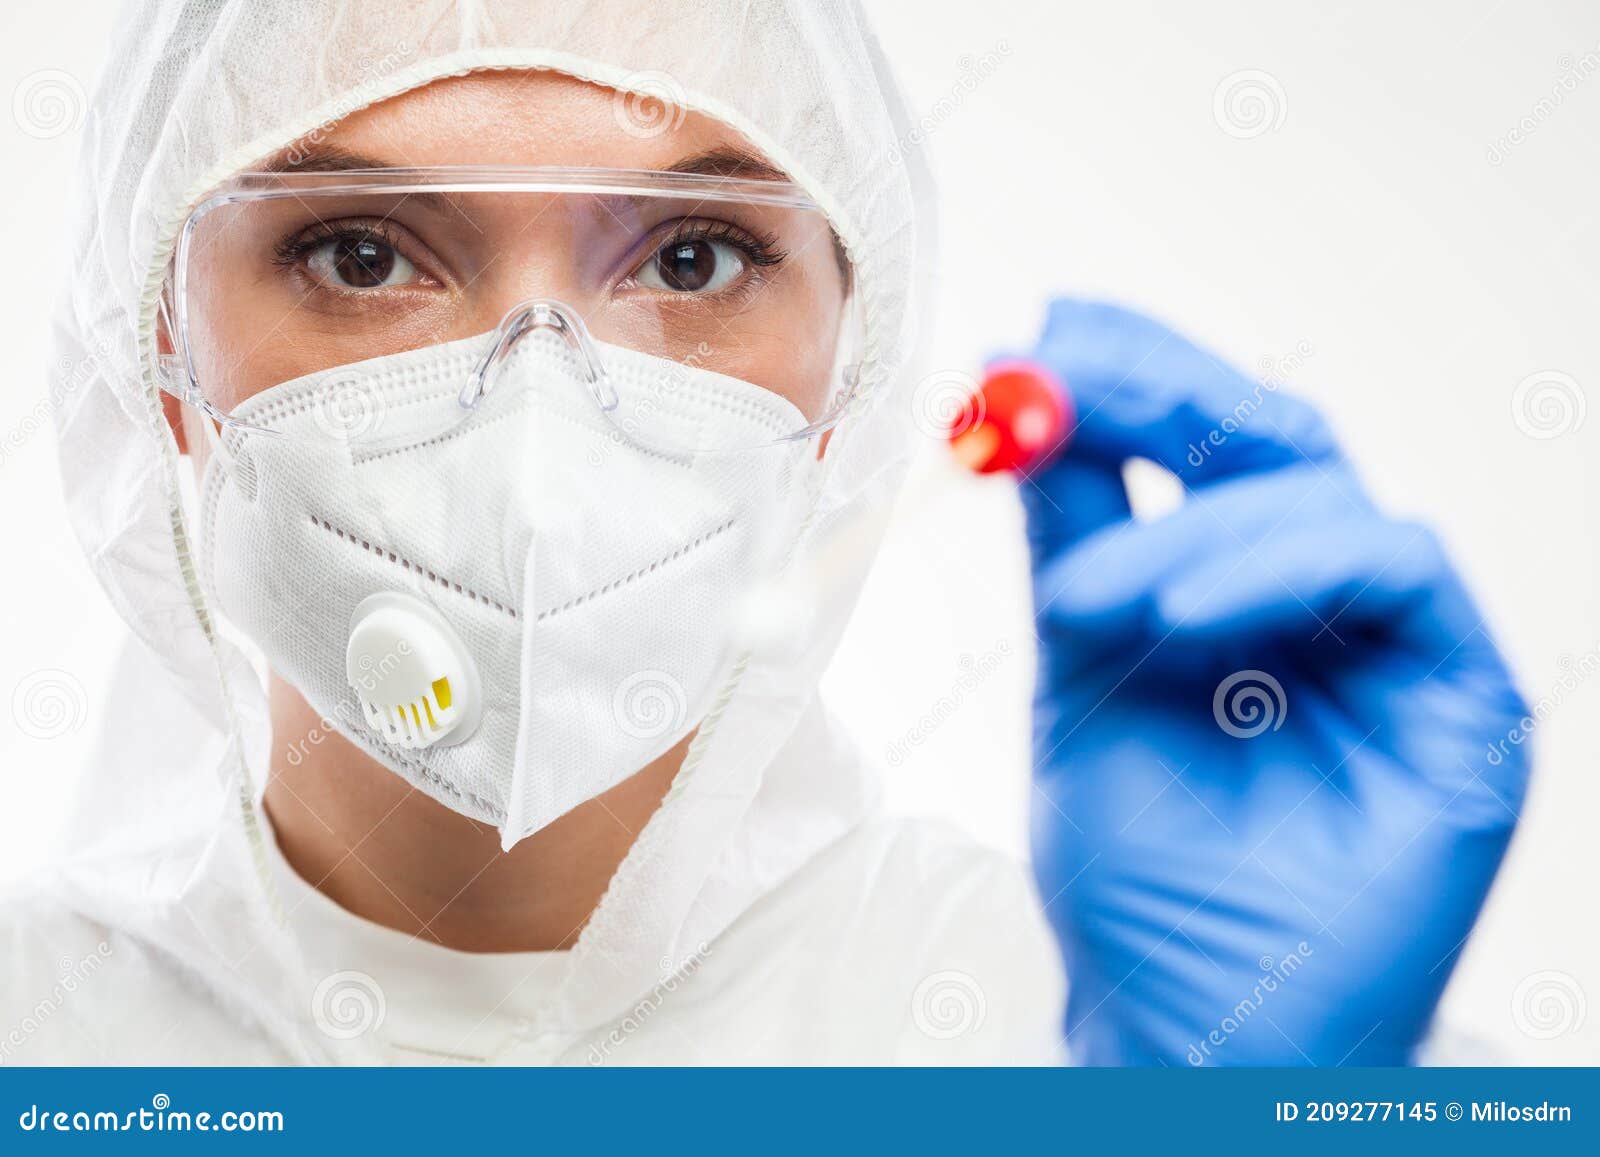 female caucasian nhs front line medic holding swab collection stick